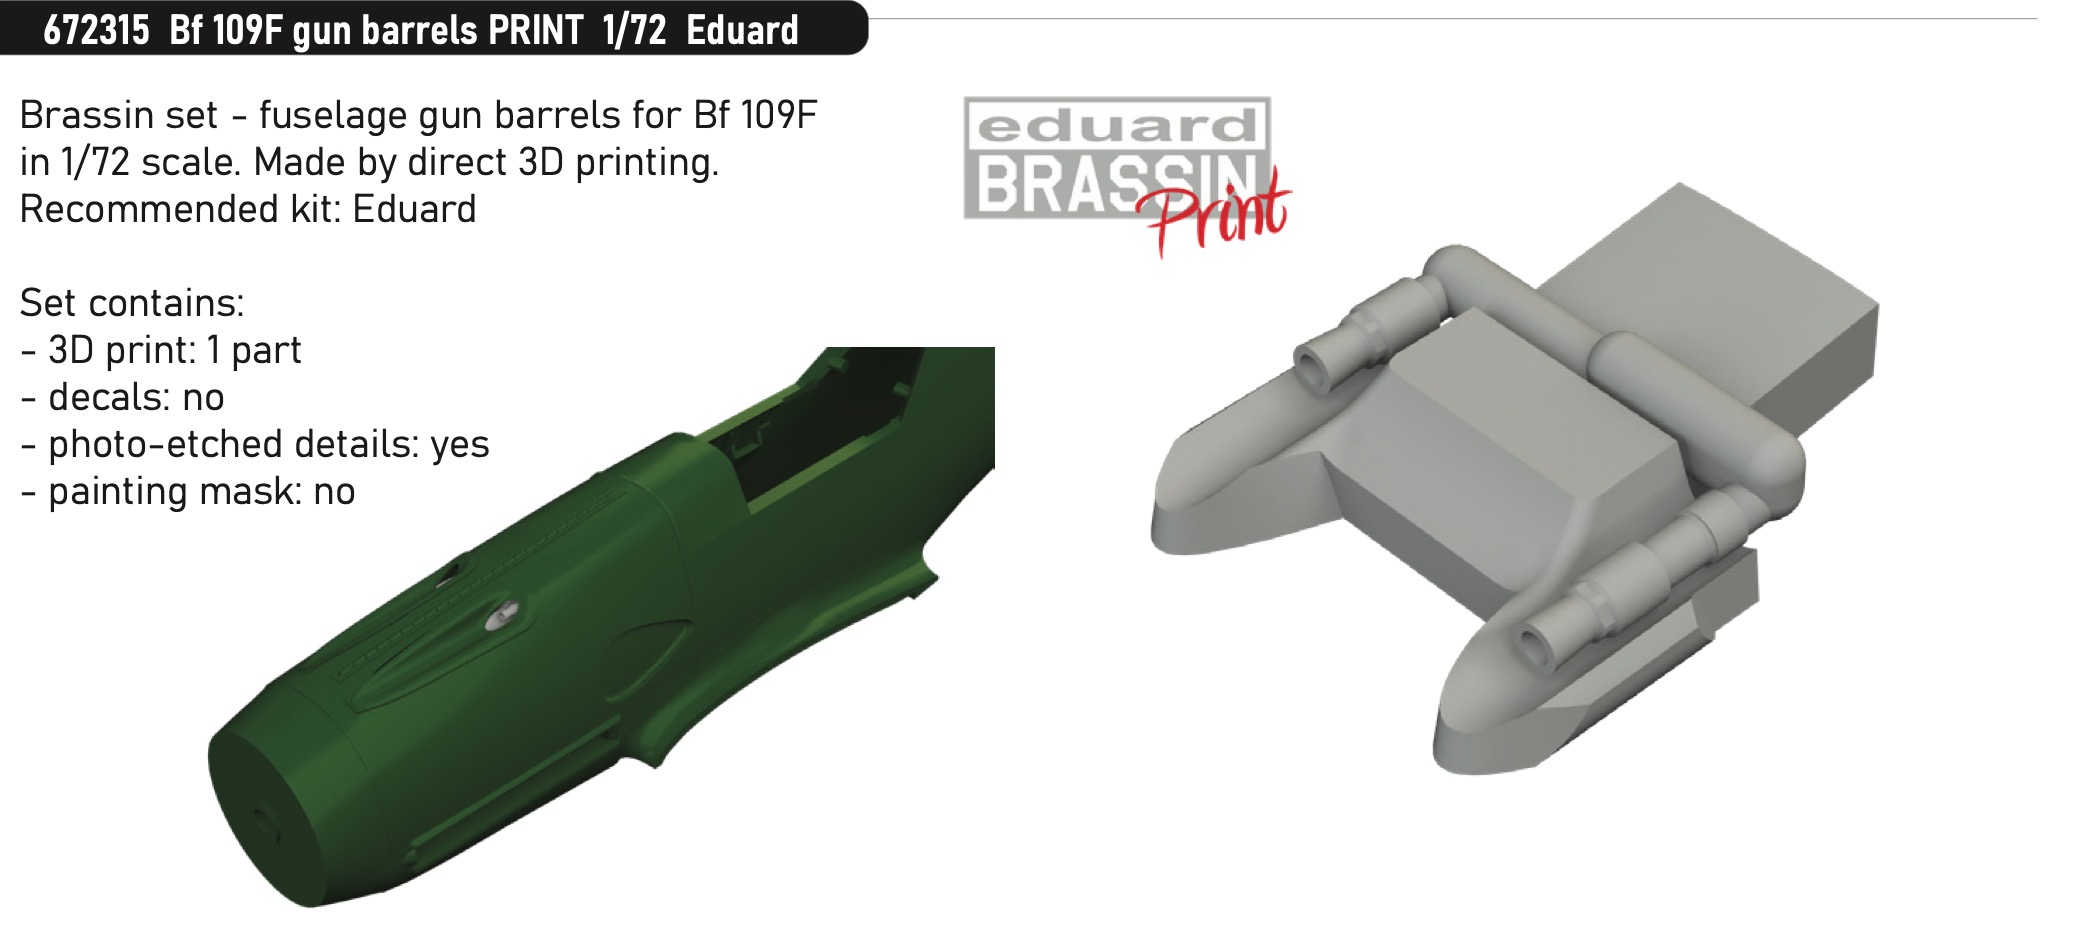 Additions (3D resin printing) 1/72 Messerschmitt Bf-109F gun barrels 3D-Printed (designed to be used with Eduard kits)